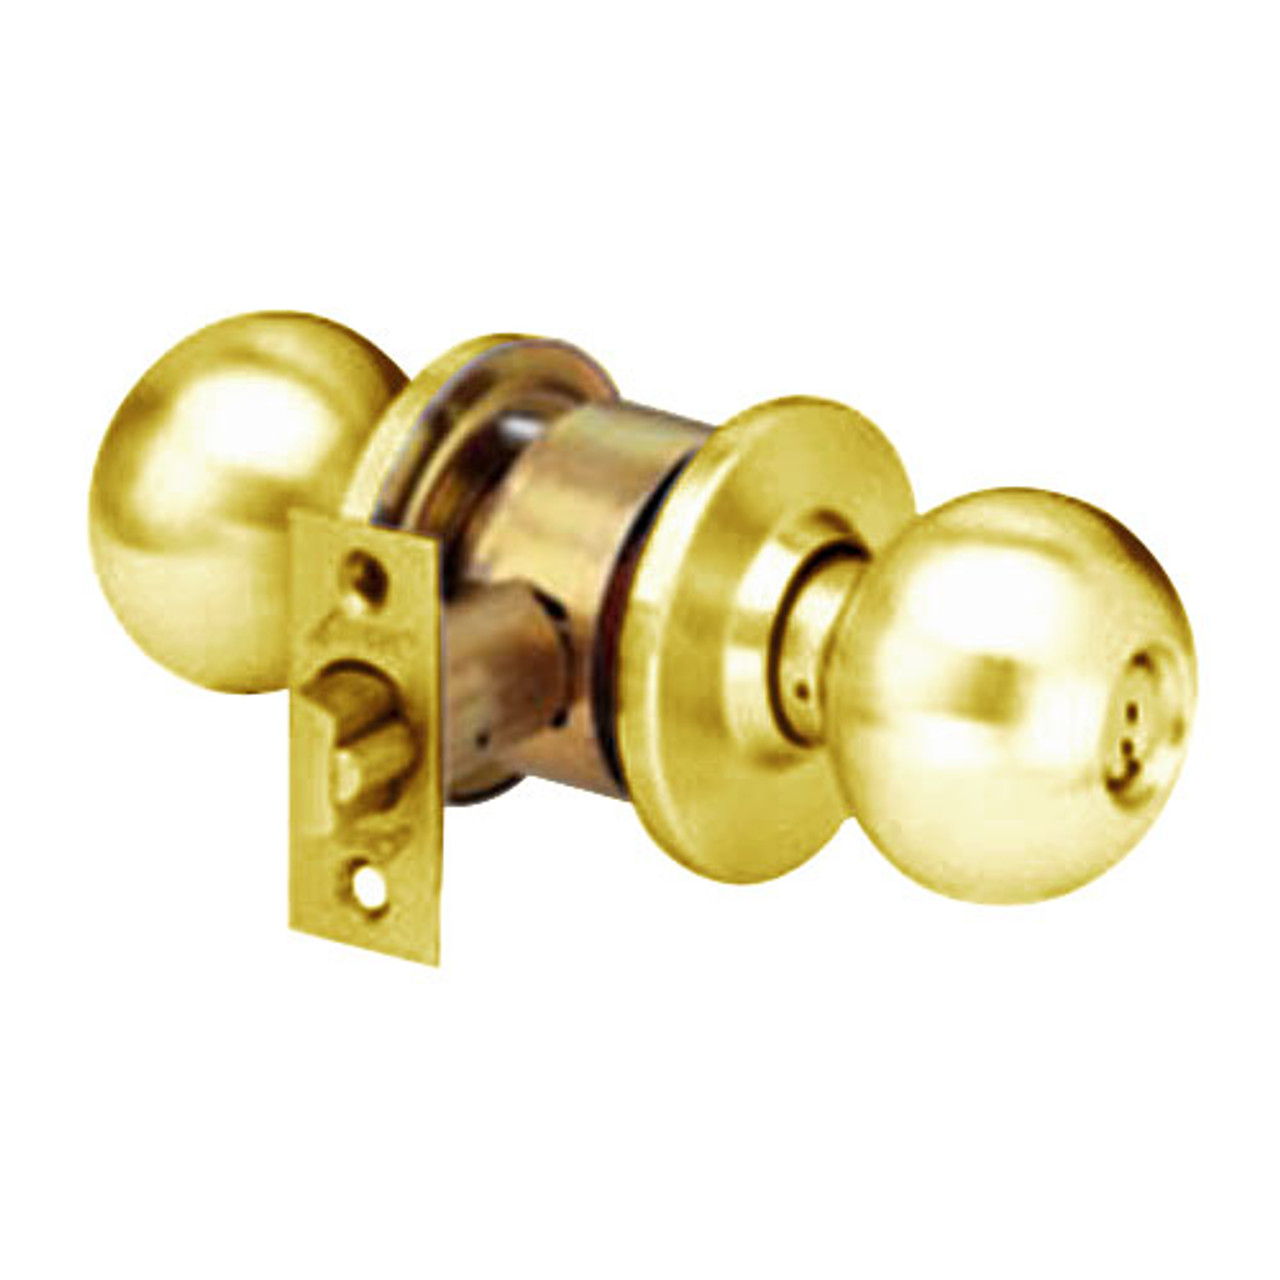 MK14-BD-05A Arrow Lock MK Series Cylindrical Locksets Single Cylinder for Service Station with BD Knob in Antique Brass Finish